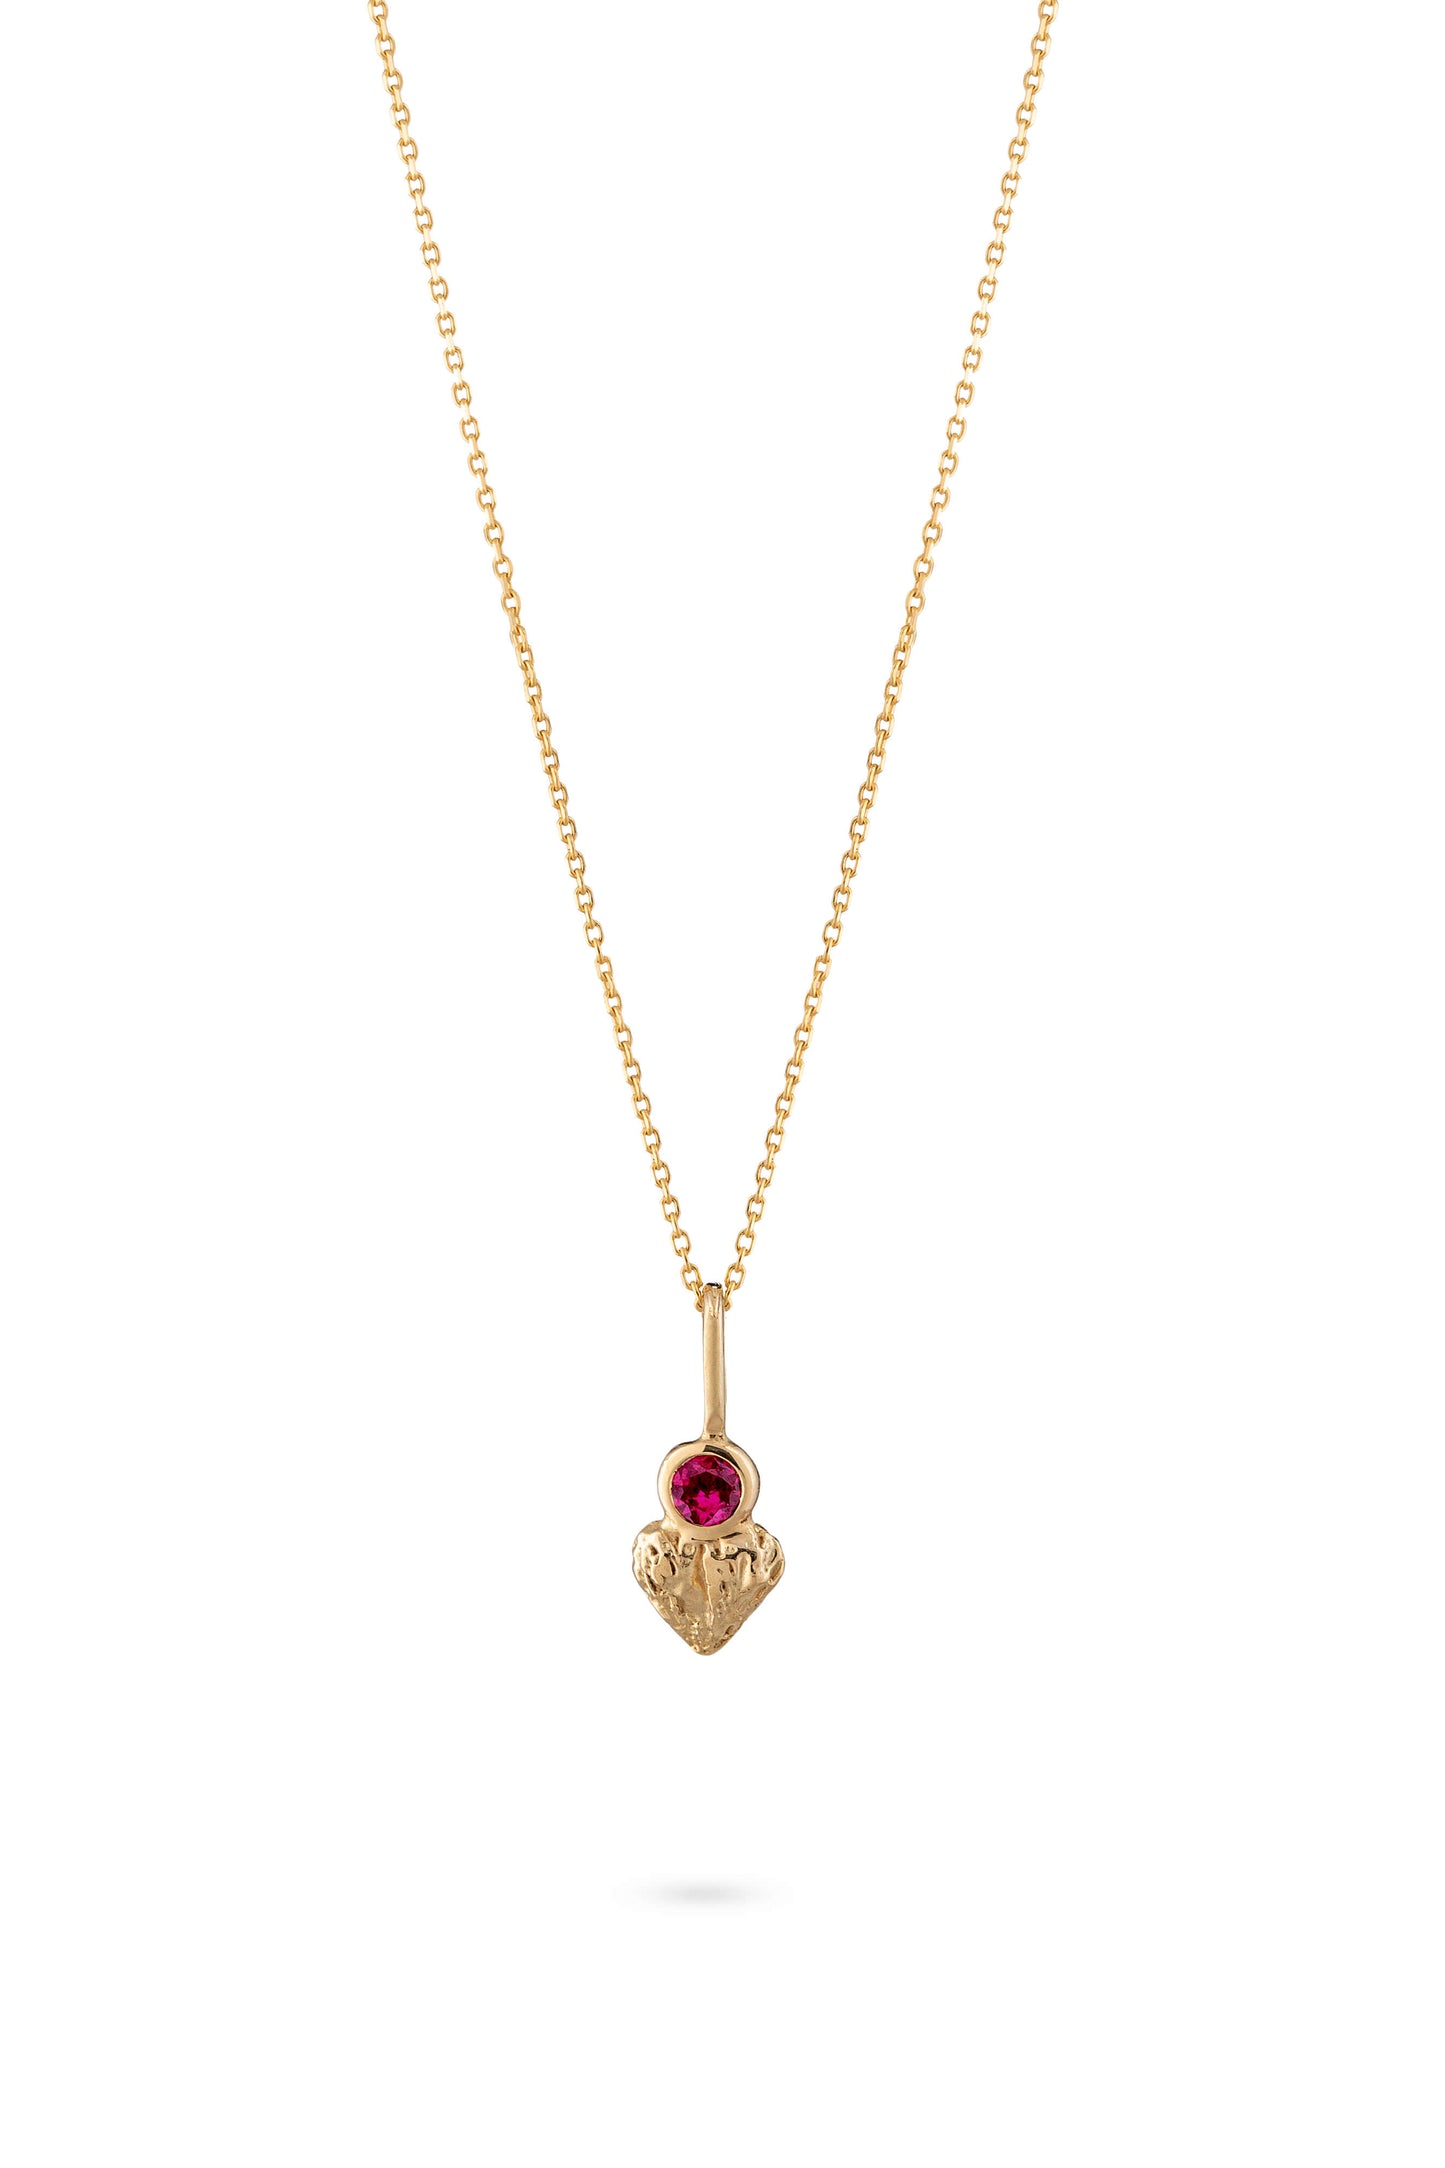 Heart Necklace - Angel's Wings with Ruby / S